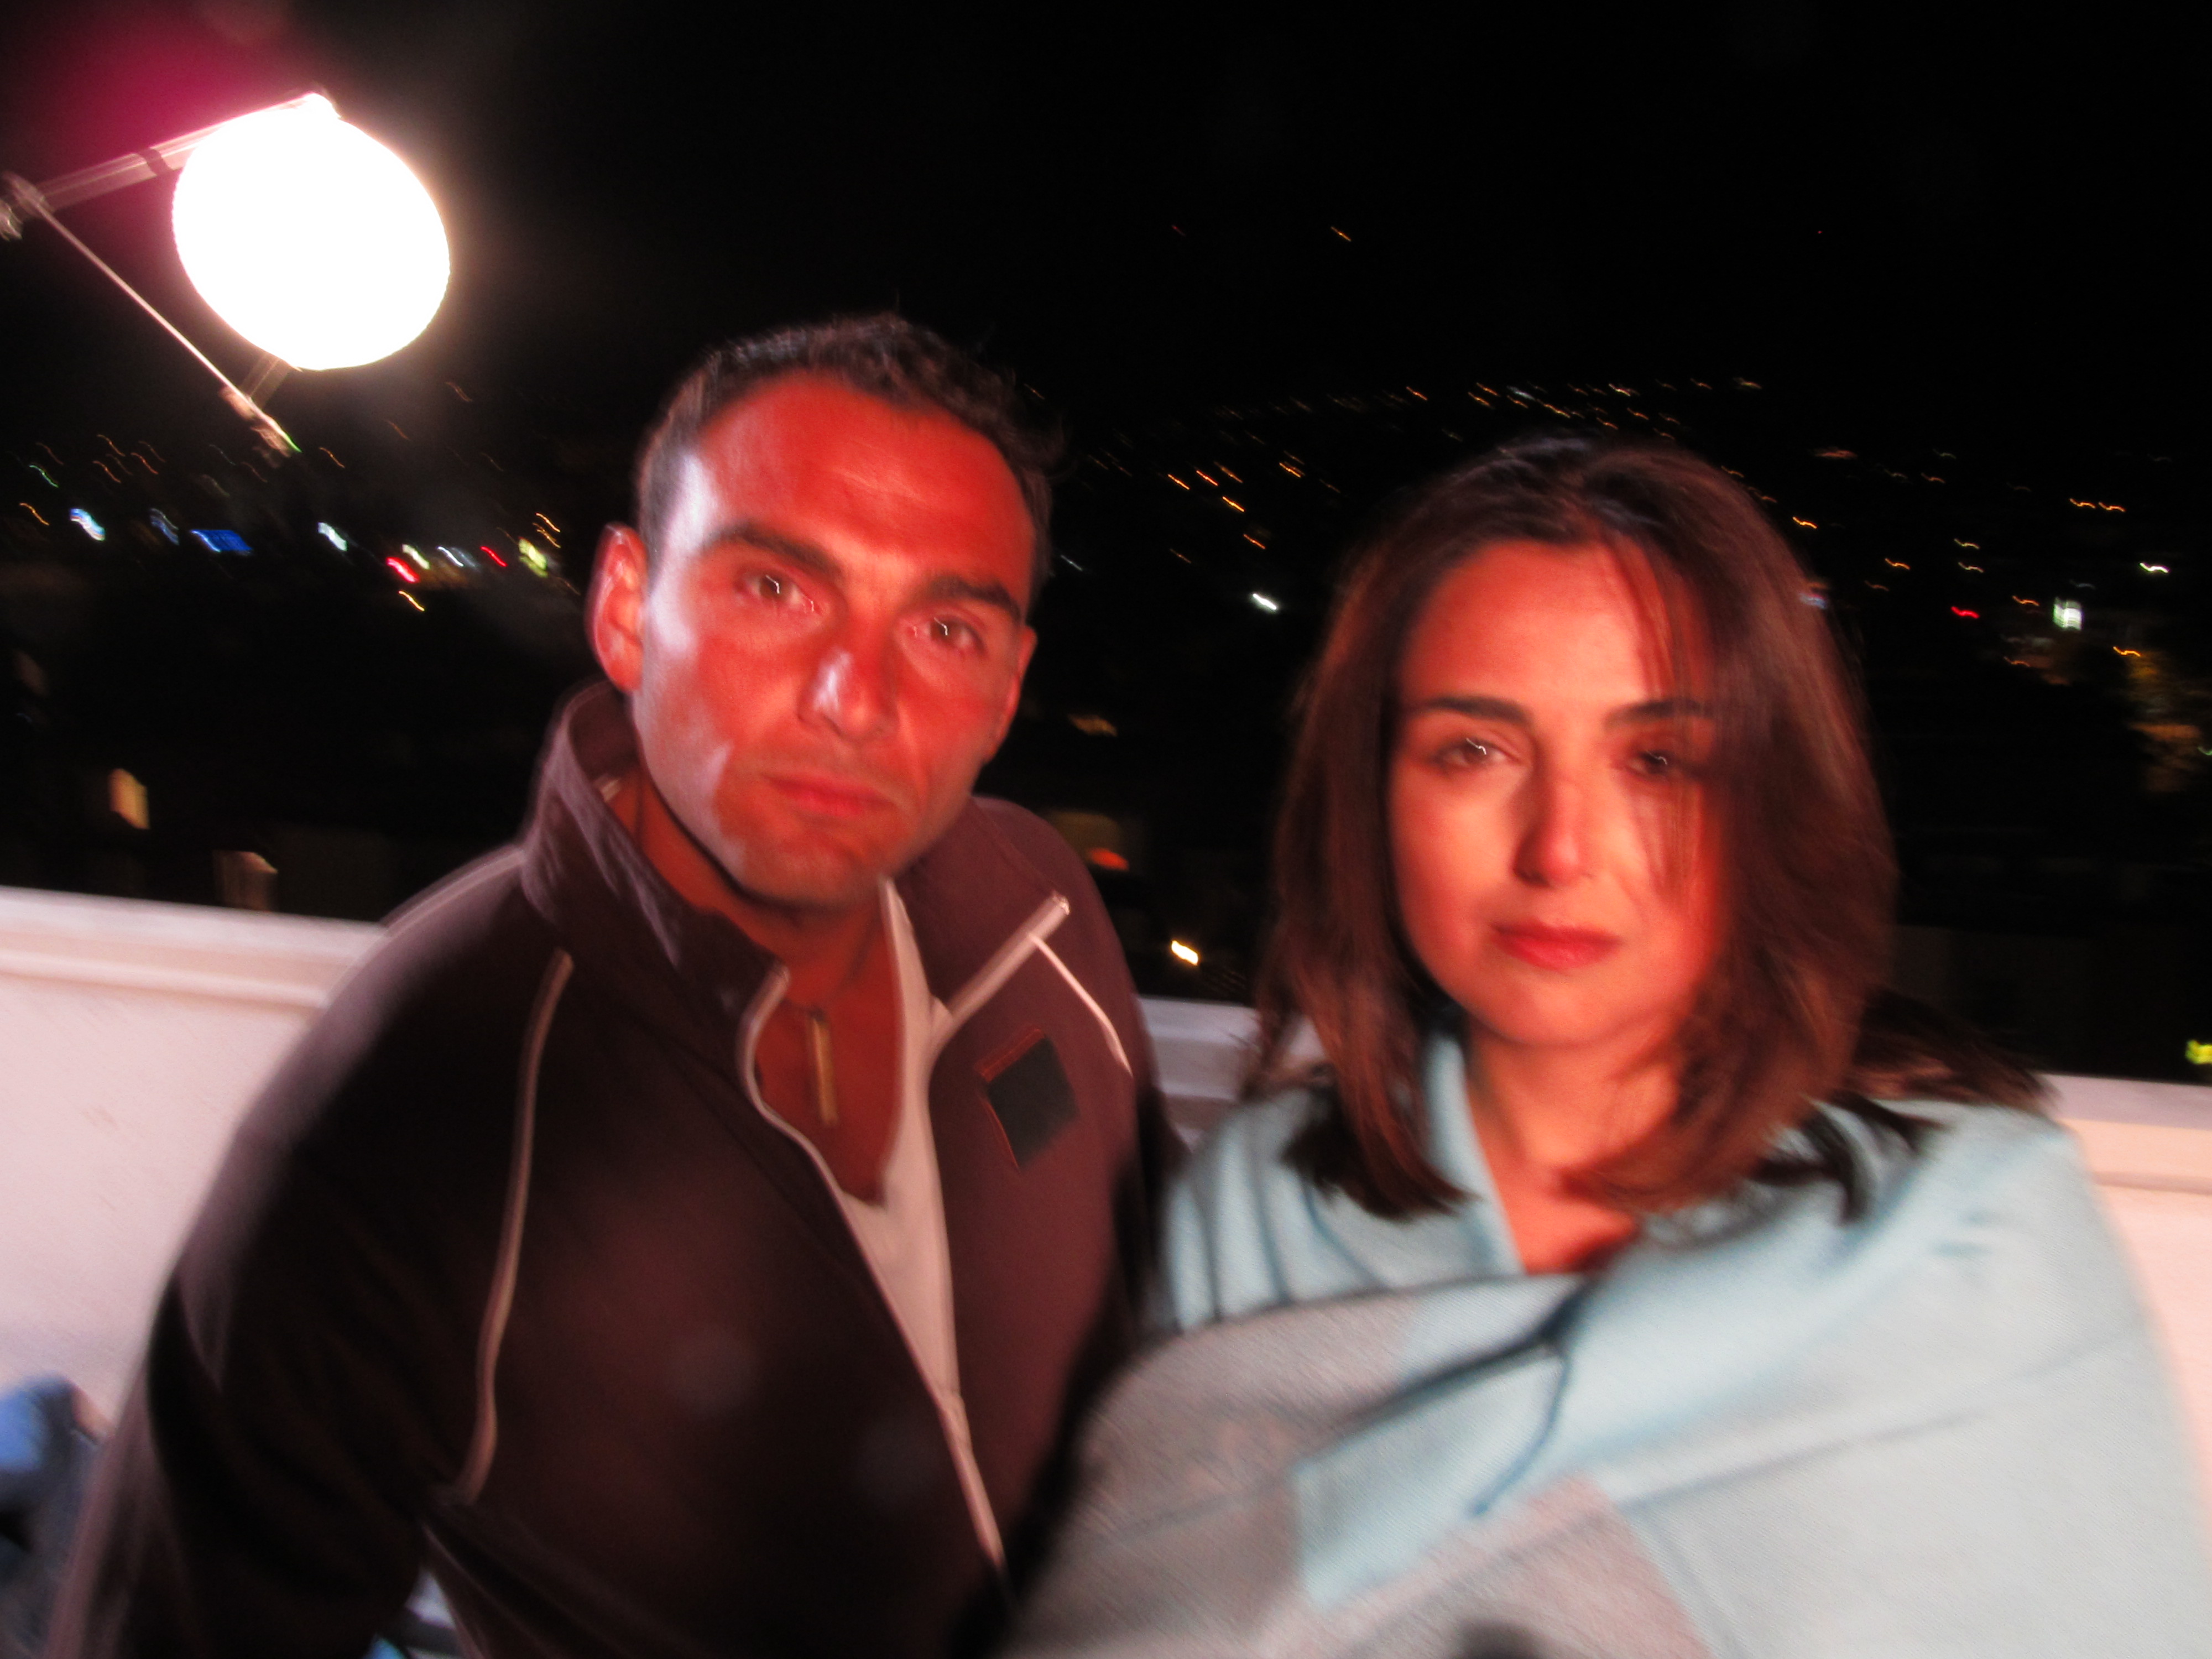 Musician/Actor APoet Nomad (Mohammad) and Writer/Director Nicole Kian Sadighi (Neda) on set of the explosive new movie 